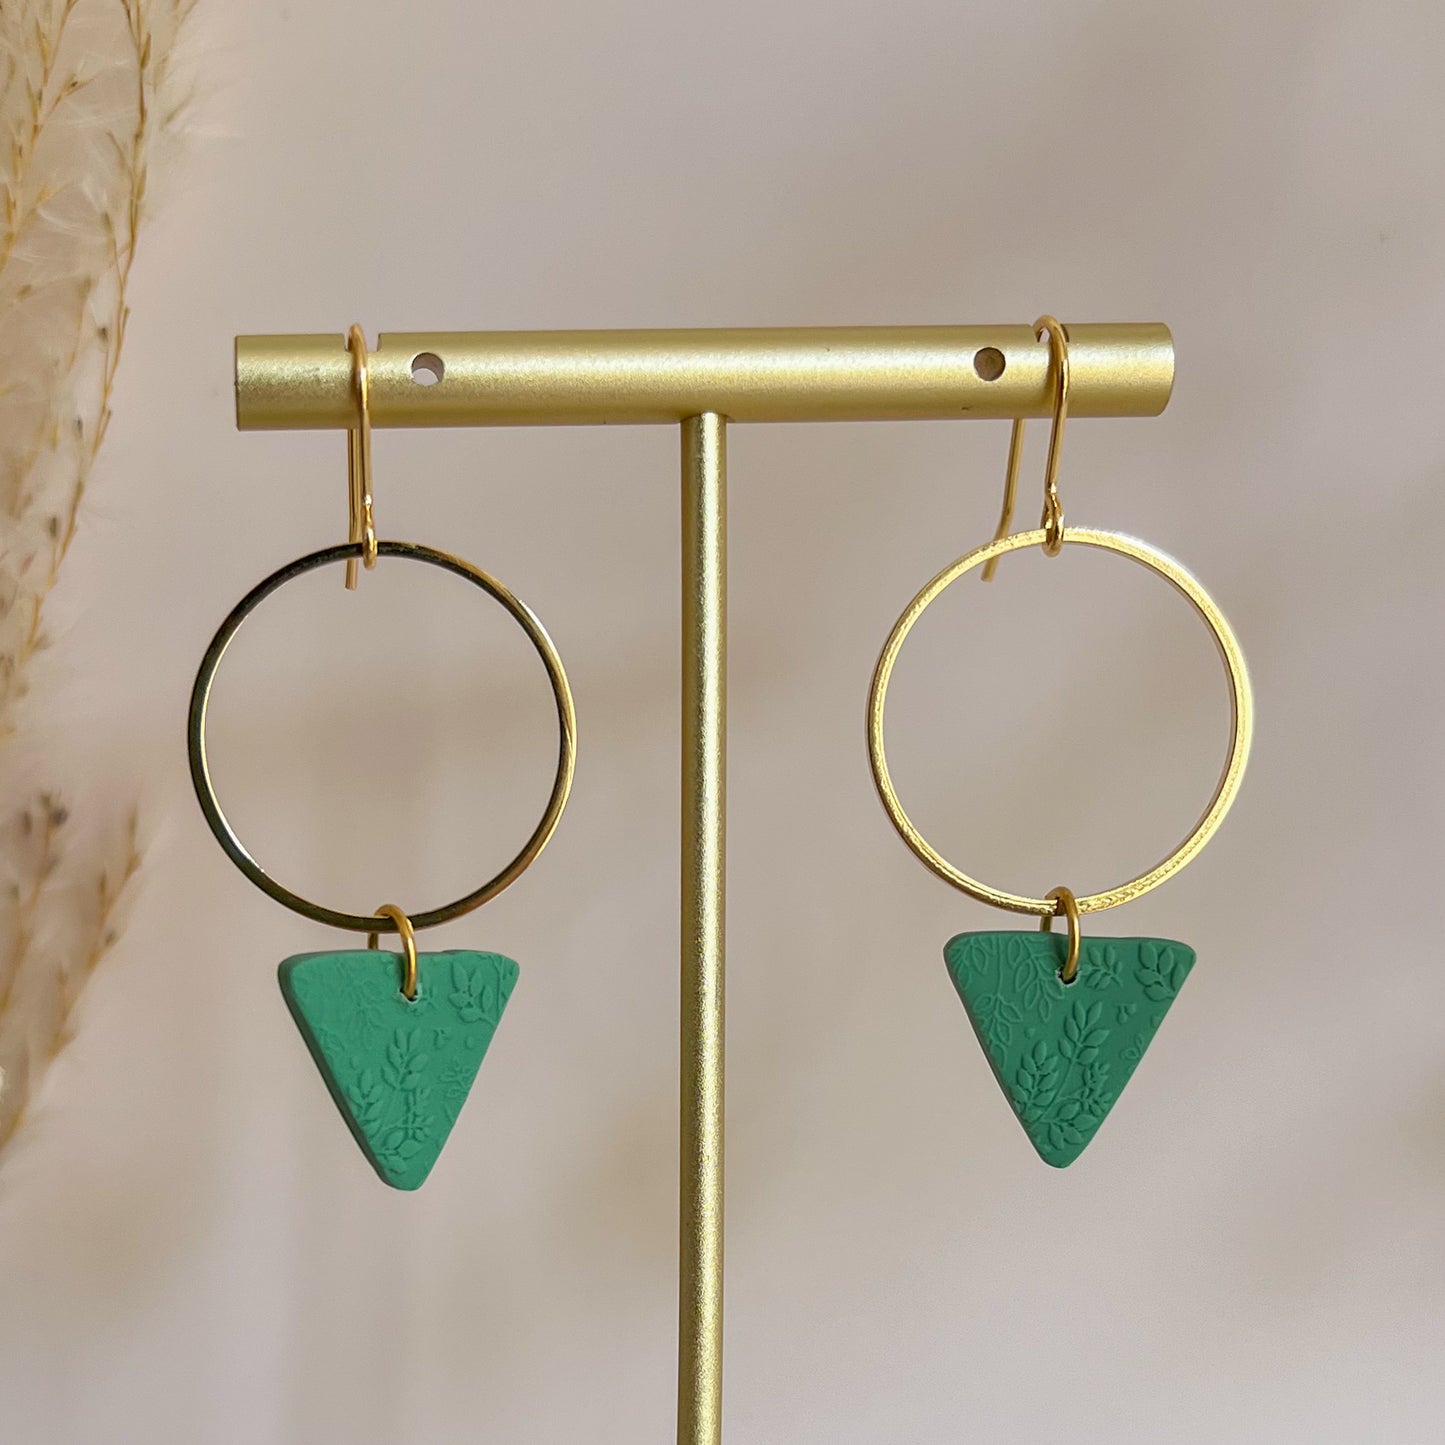 EBREL | round circle drop with triangle detail hook earrings in textured sage green